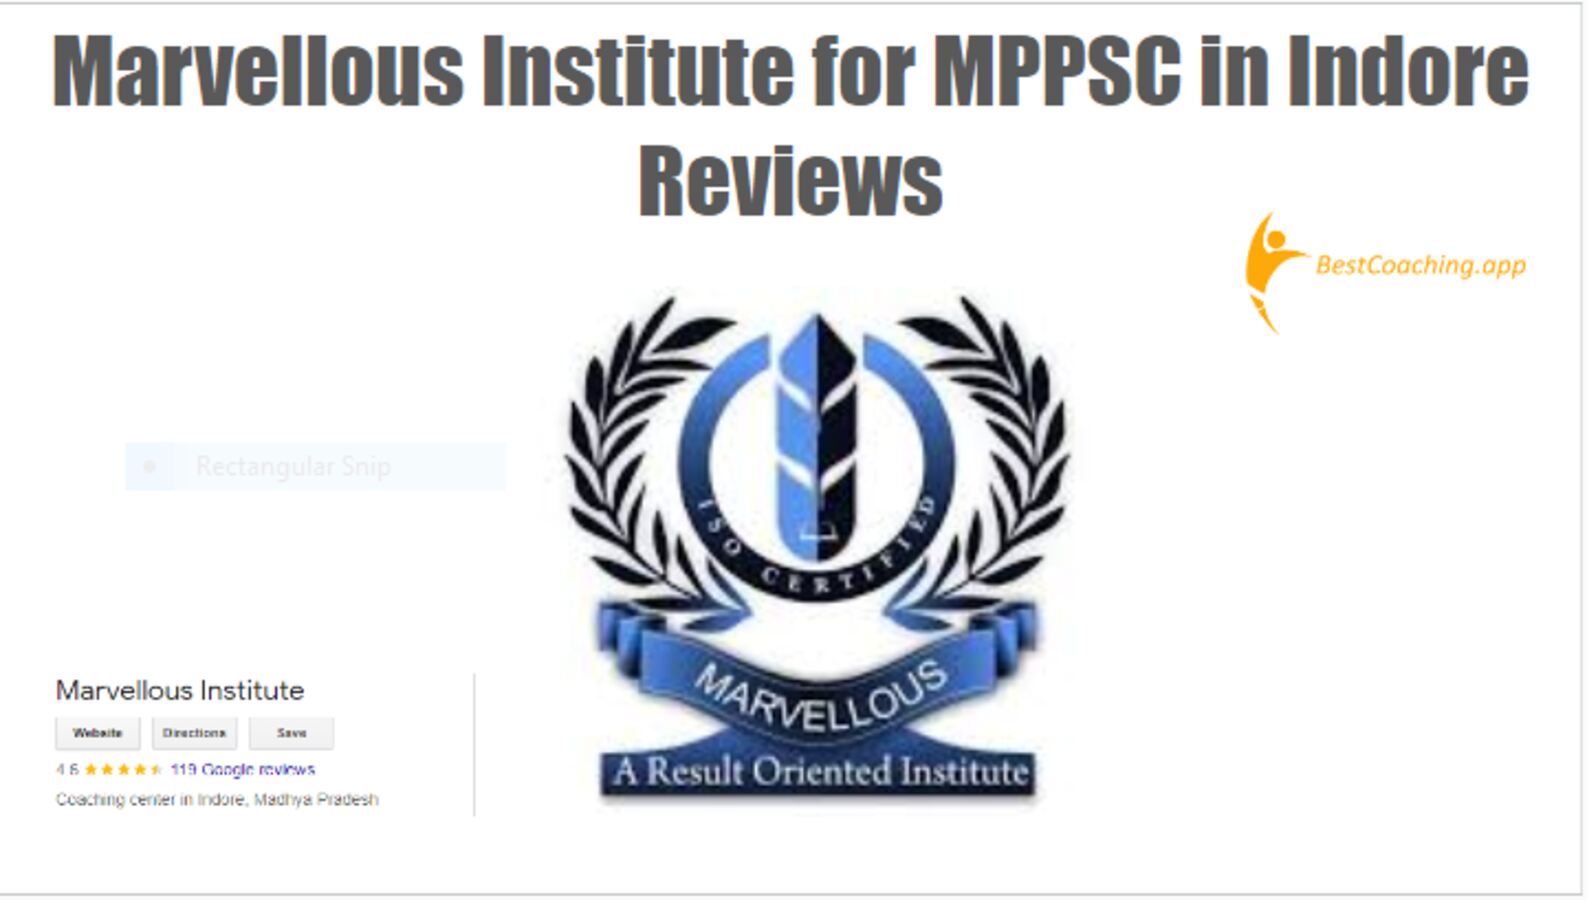 Marvellous Institute for MPPSC in Indore Reviews